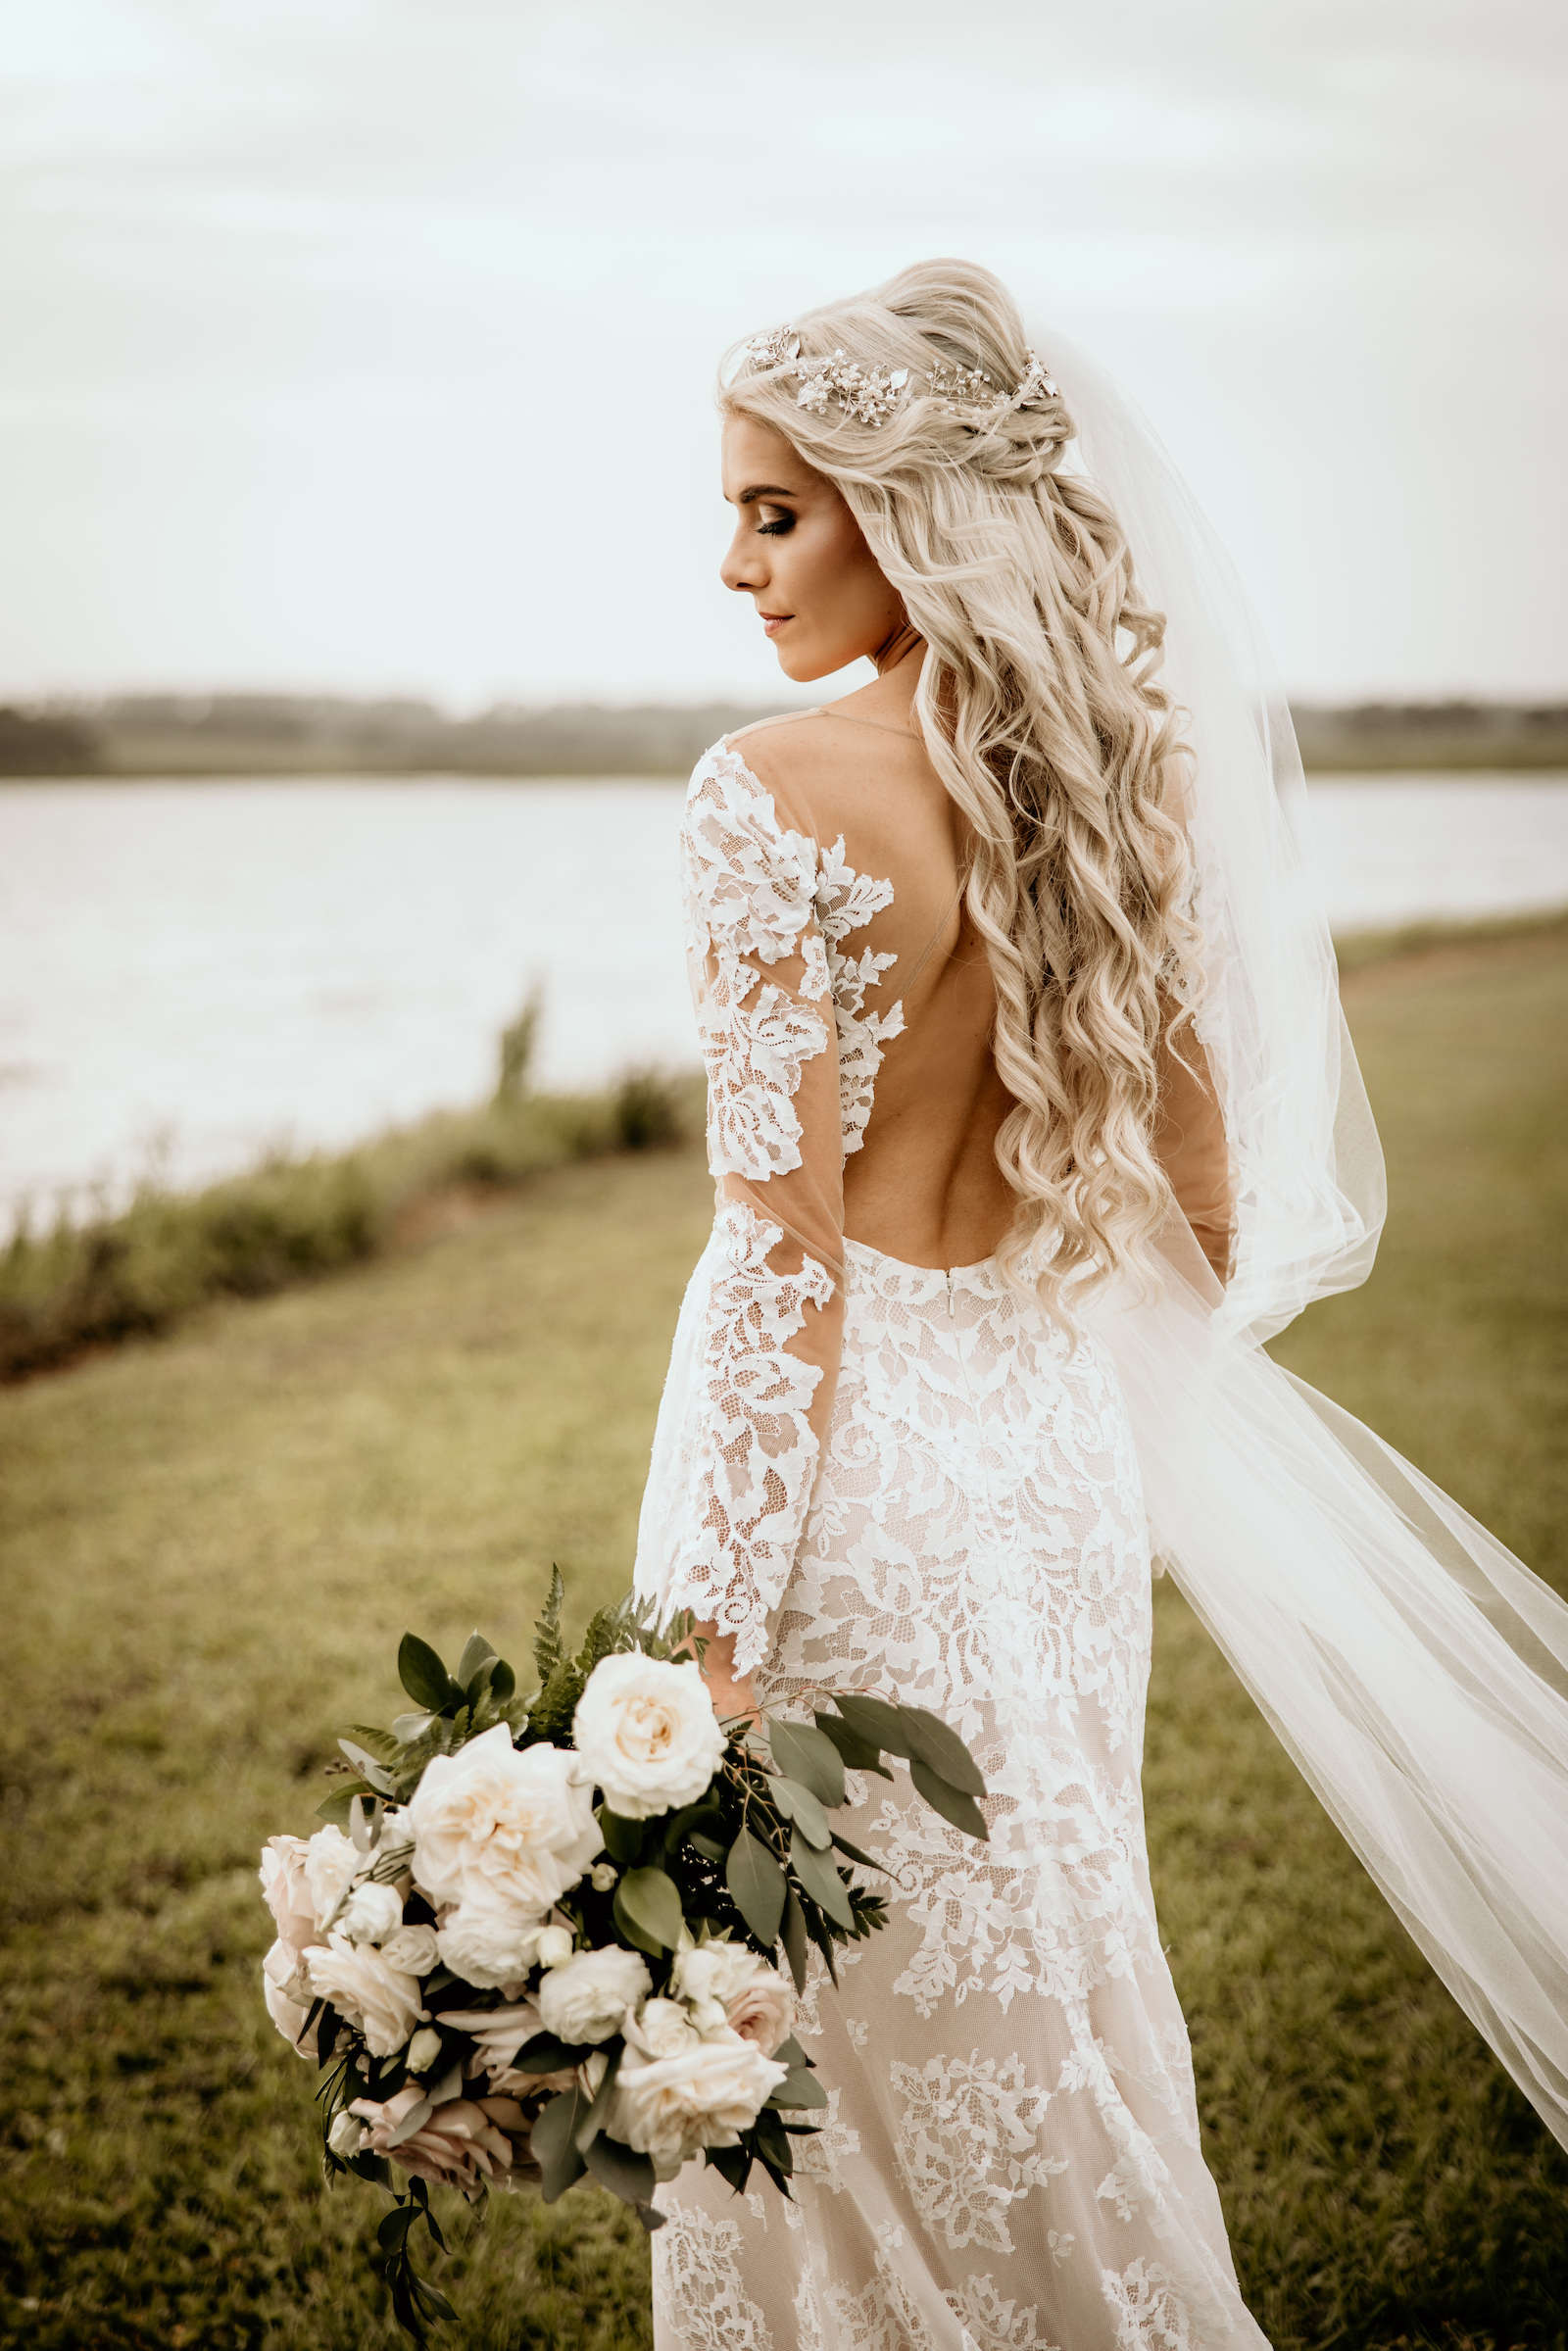 Bride with Smokey Eye and Soft Curls with Beaded Head Piece | Lace Illusion Long Sleeve Boho Wedding Dress | Tampa Bay Adore Bridal Hair and Makeup